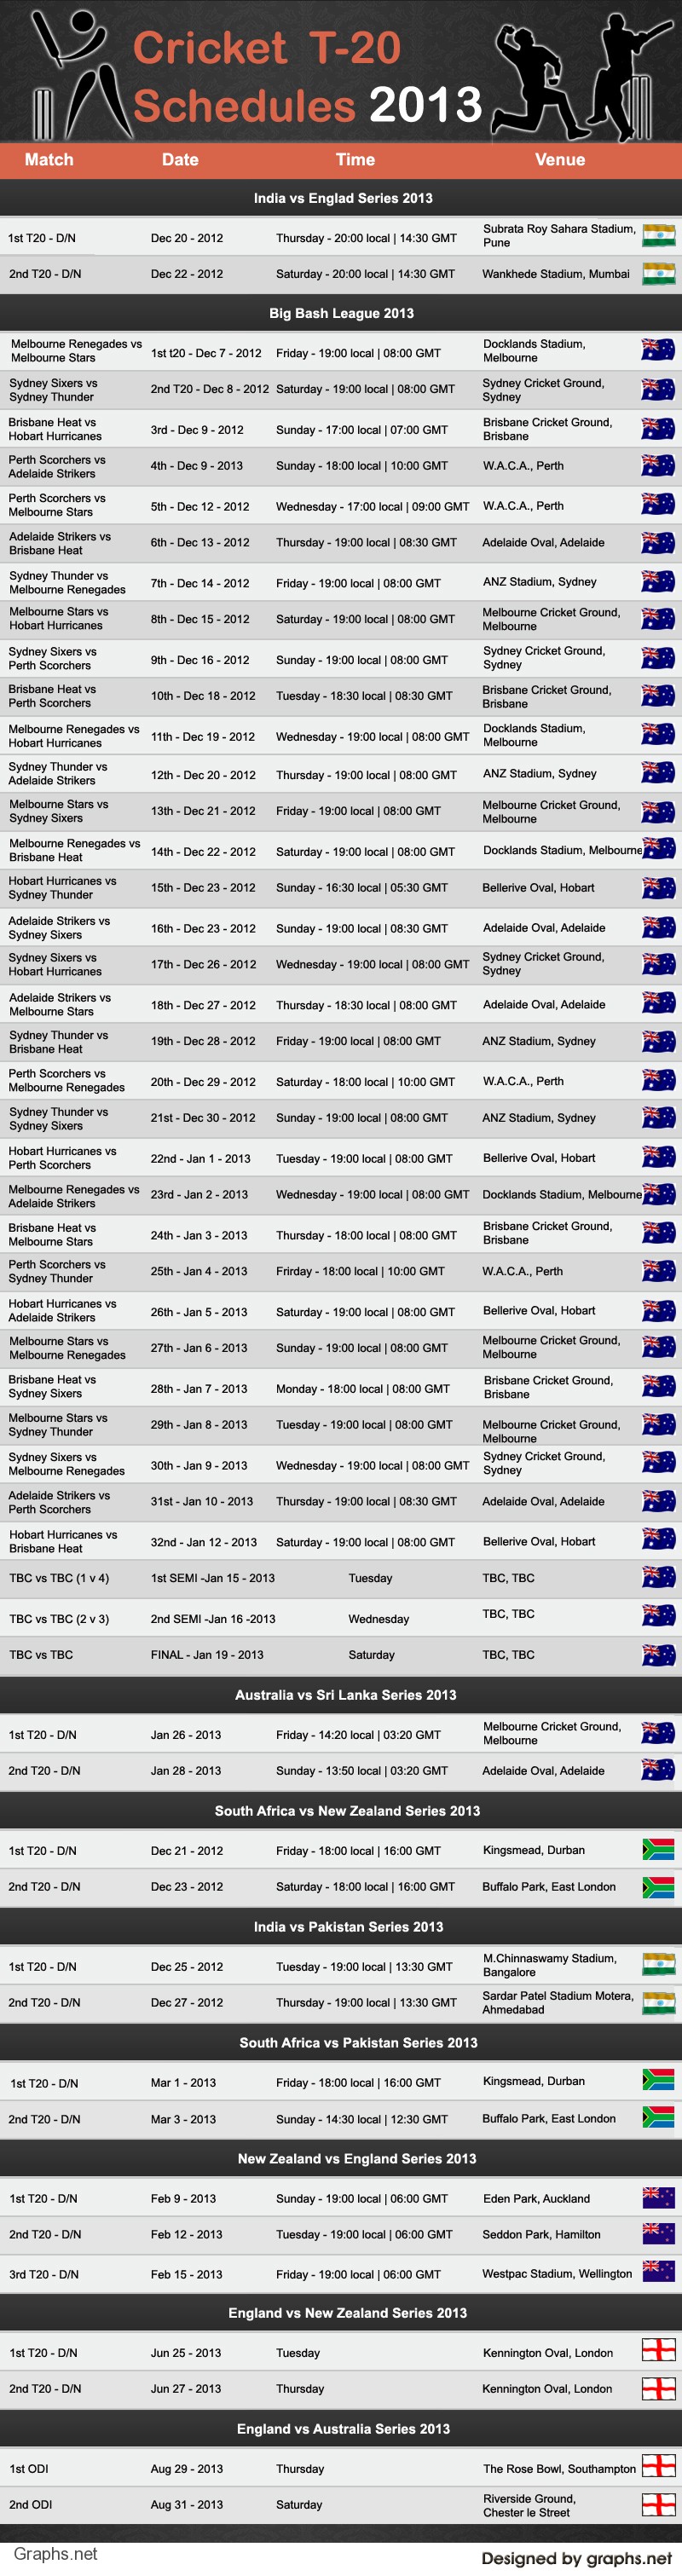 T20 Cricket Matches in 2013